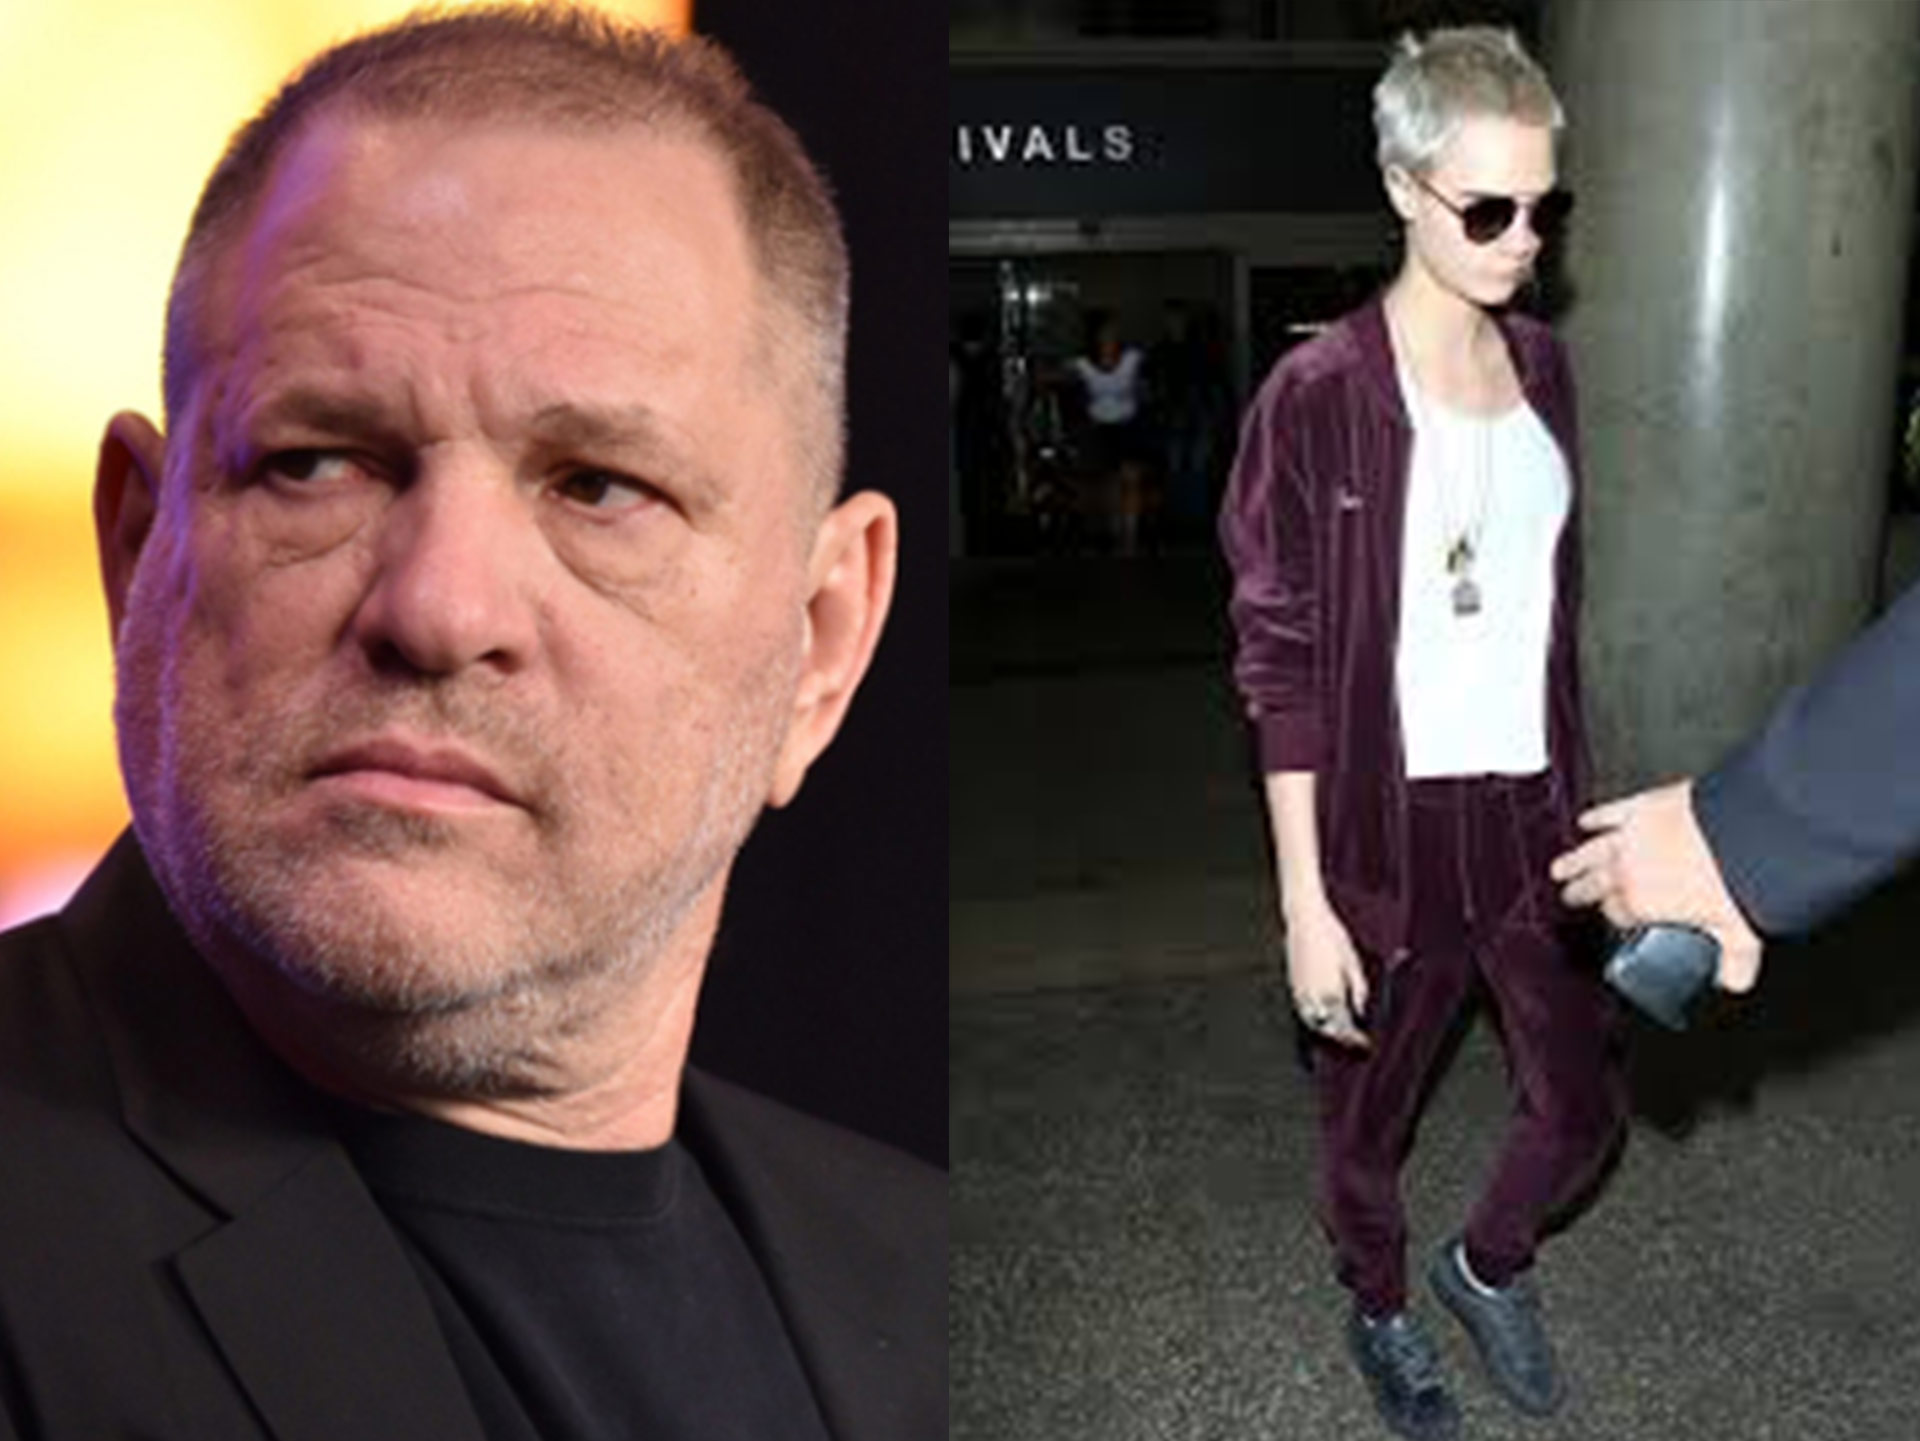 Harvey Weinstein told Cara Delevingne she’d never make it in Hollywood if she was gay